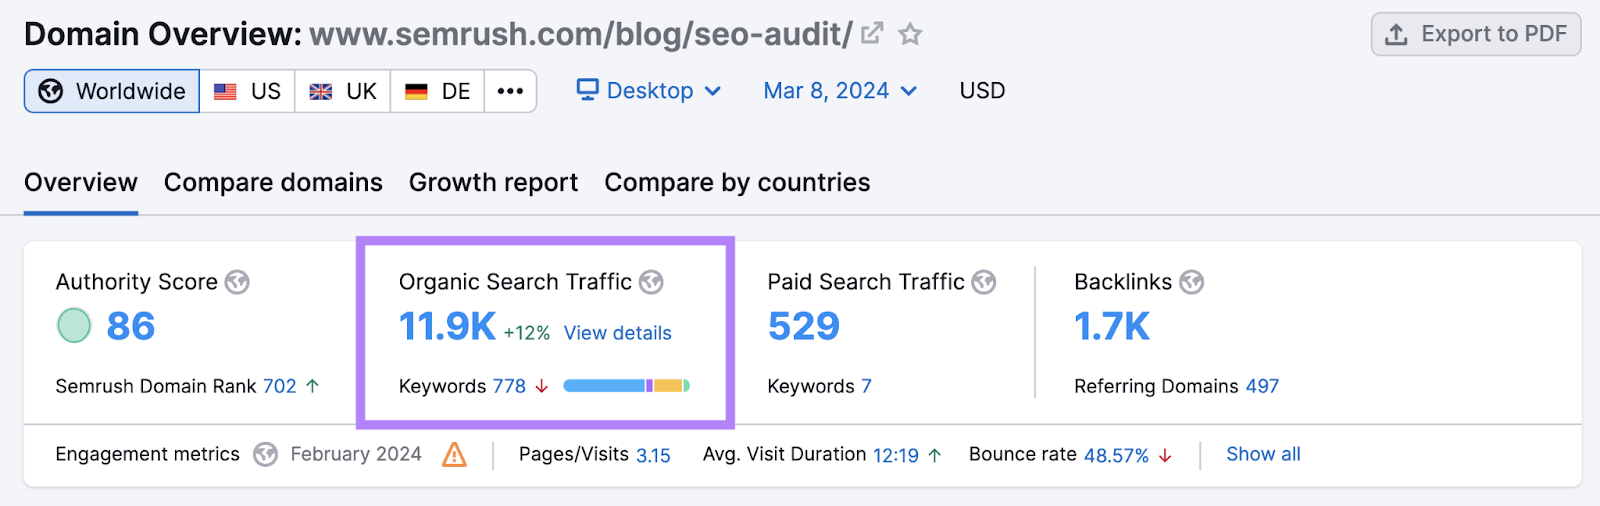 Semrush blog station  connected  SEO audits gets 11.9K integrated  visitors, according to Domain Overview tool